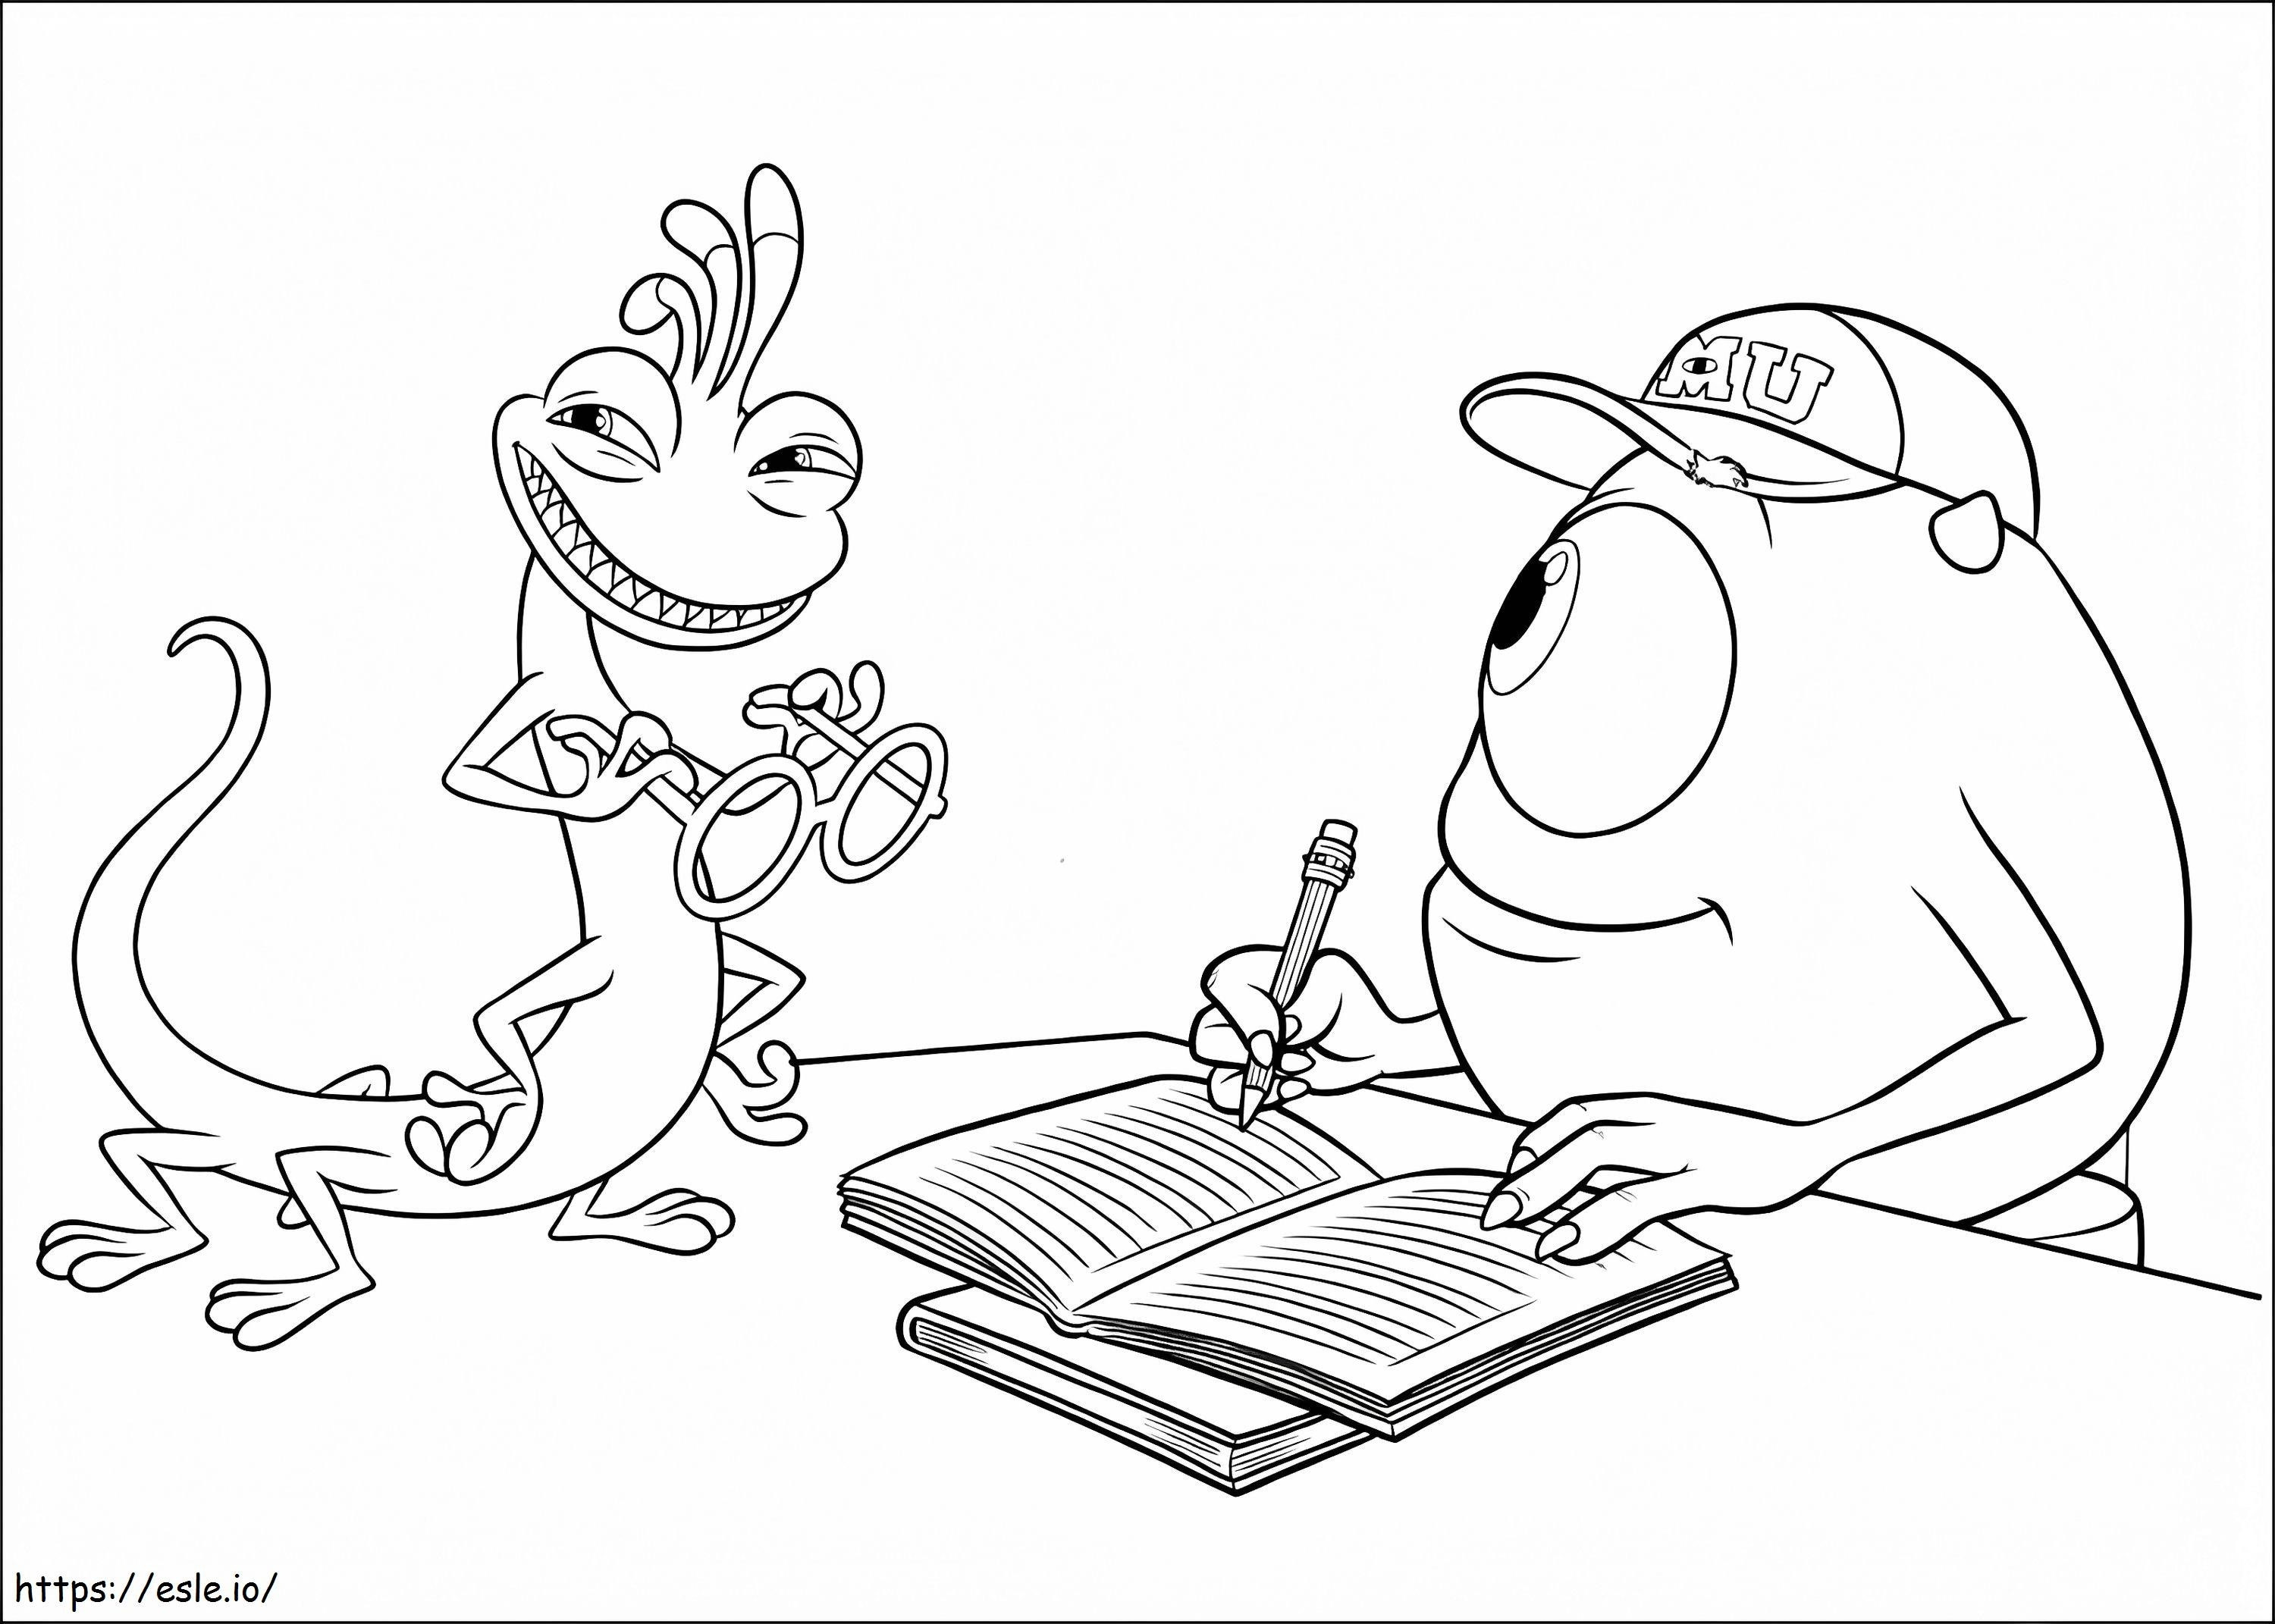 Print Monsters University coloring page